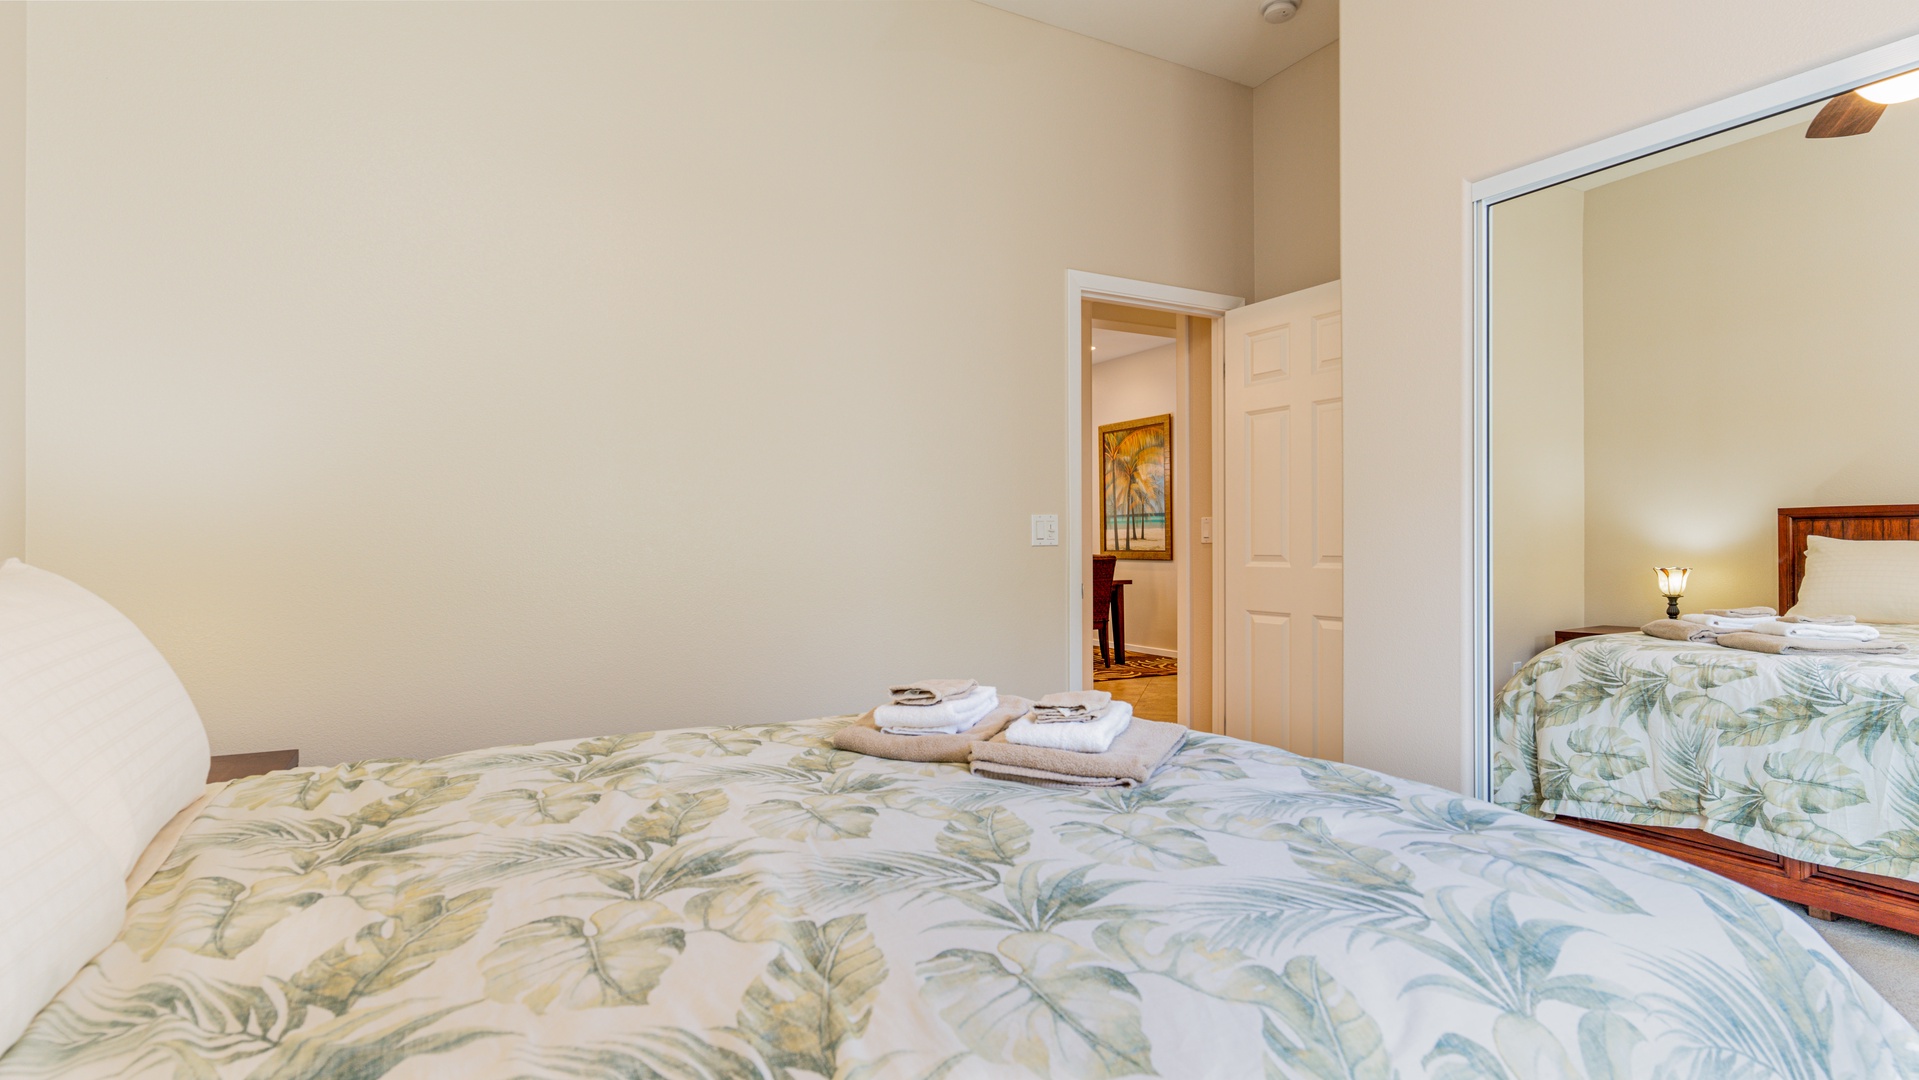 Kapolei Vacation Rentals, Coconut Plantation 1234-2 - The first floor guest bedroom is comfortable and well designed.